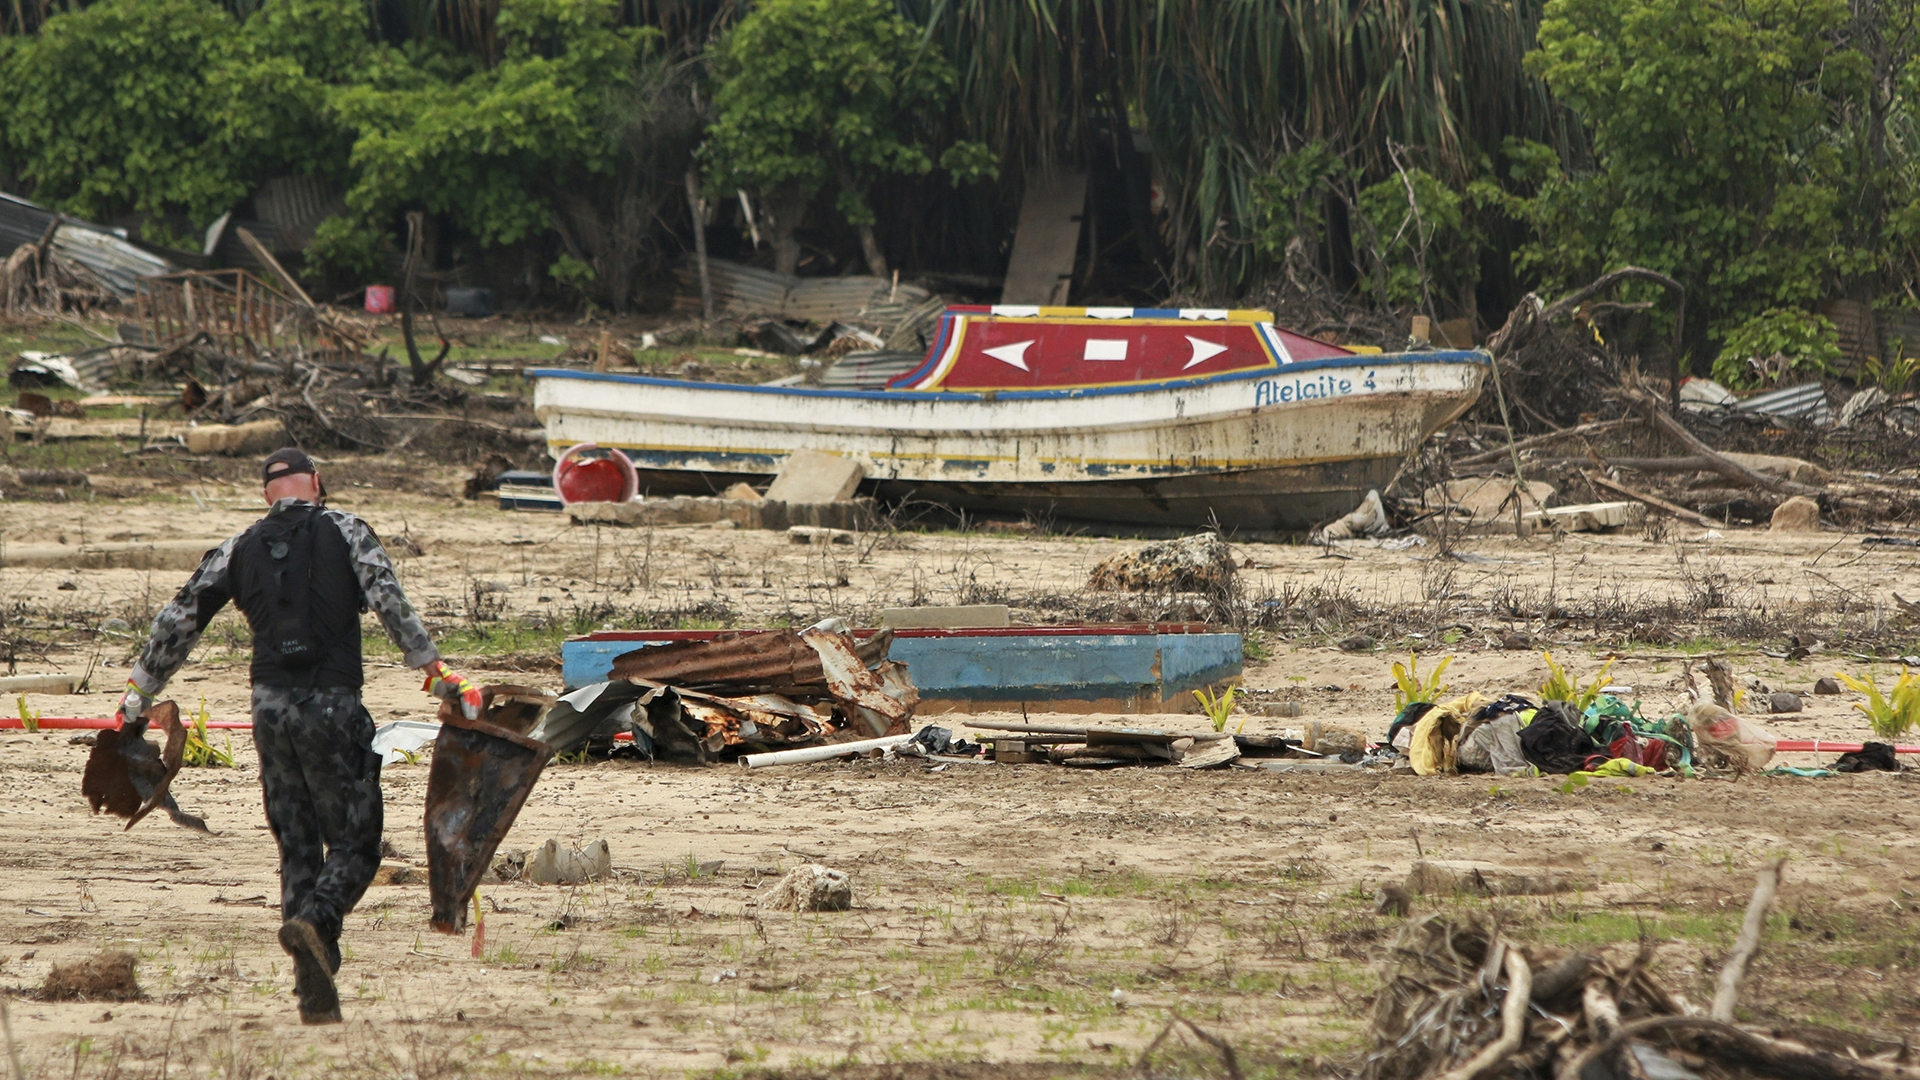 a person cleans up debris on the island of Tonga after a volcanic eruption in 2022 caused a tsunami. A boat is on land.